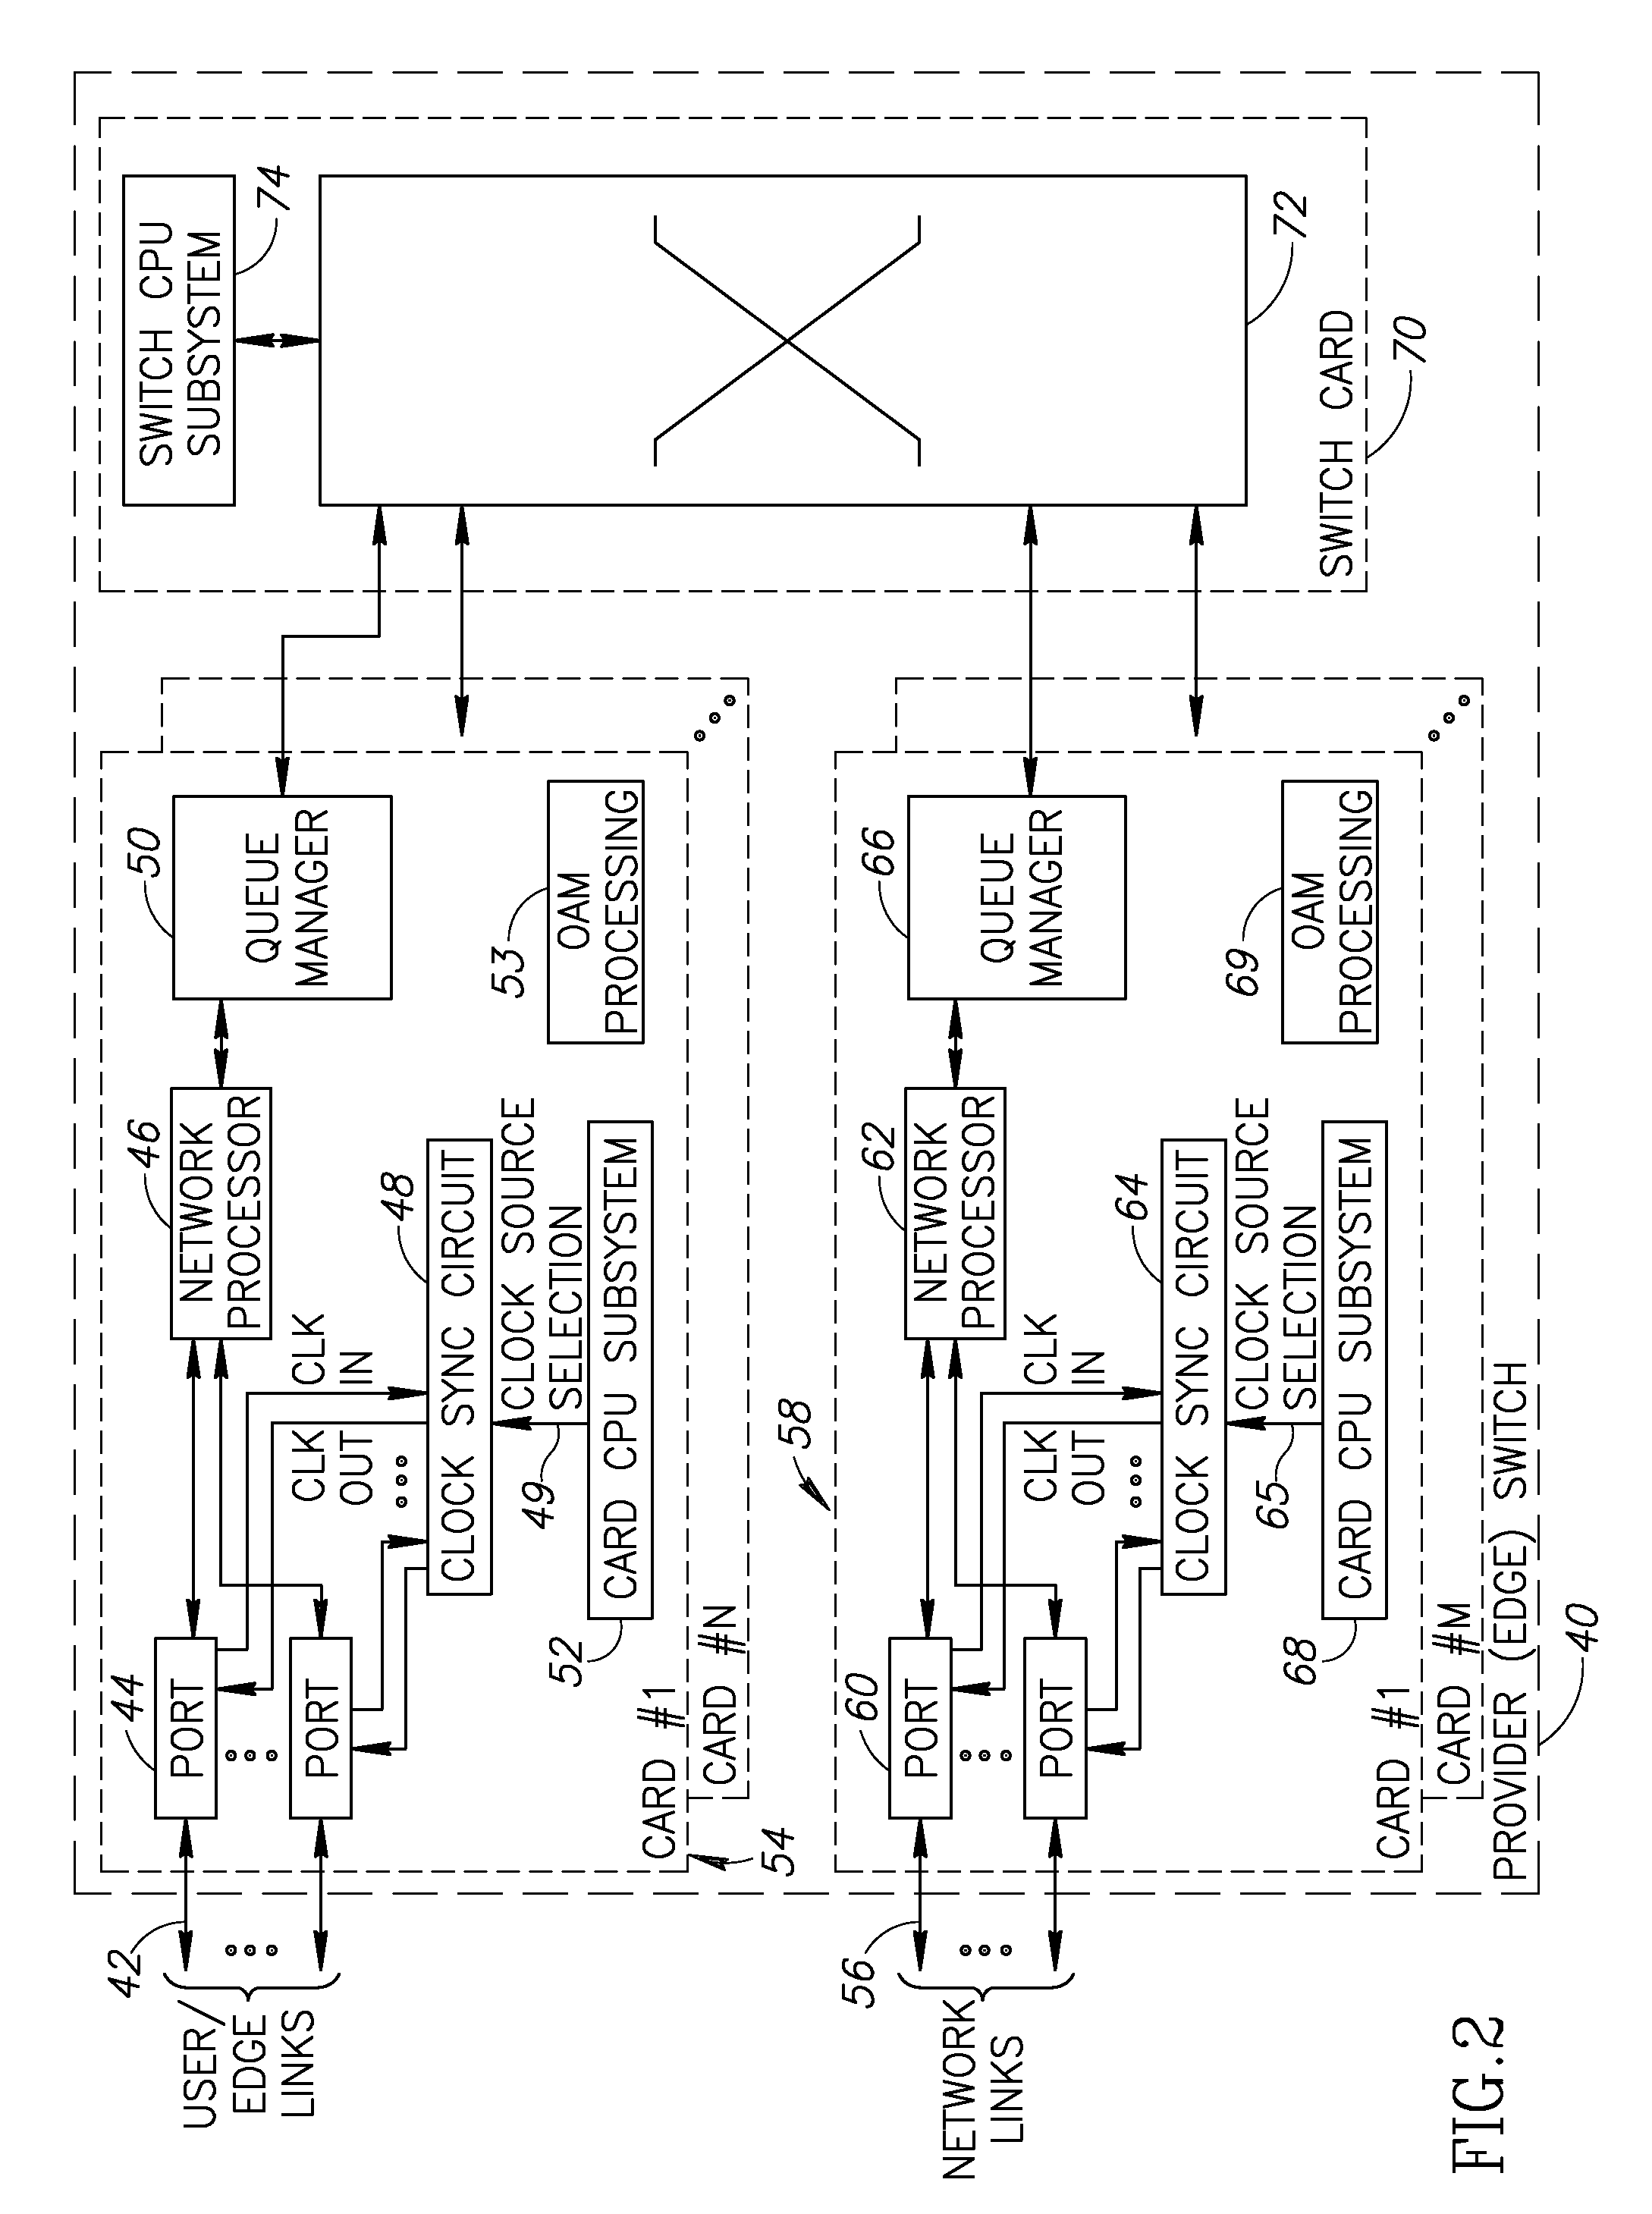 Clock synchronization and distribution over a legacy optical Ethernet network